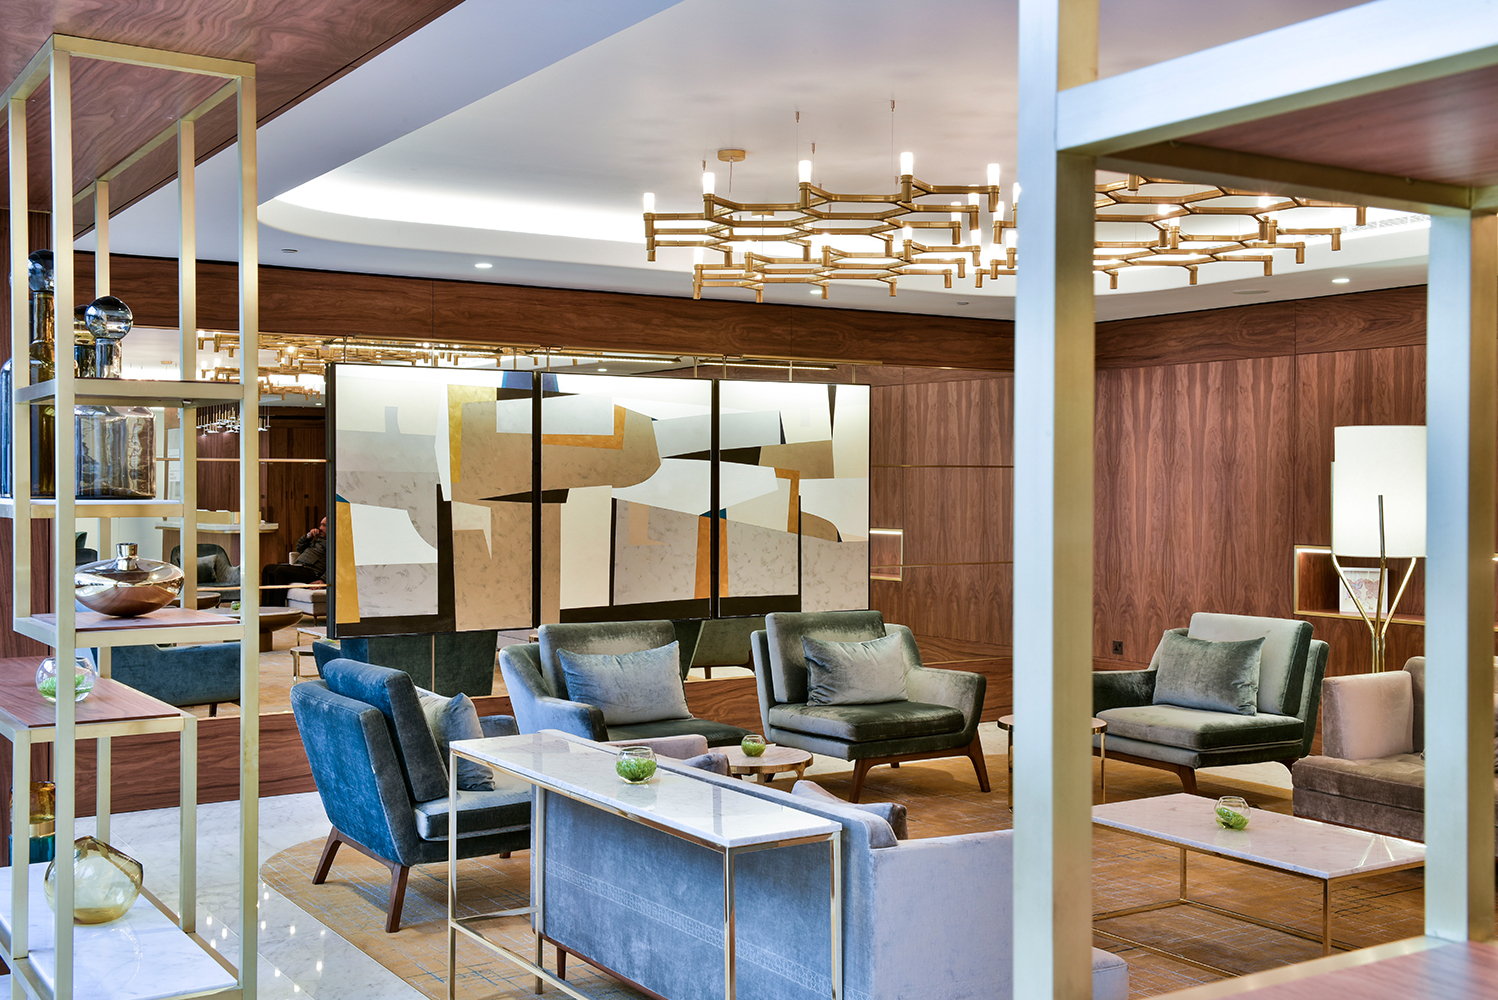 Royal Lancaster London completed its brand new design following an 80 million renovation 